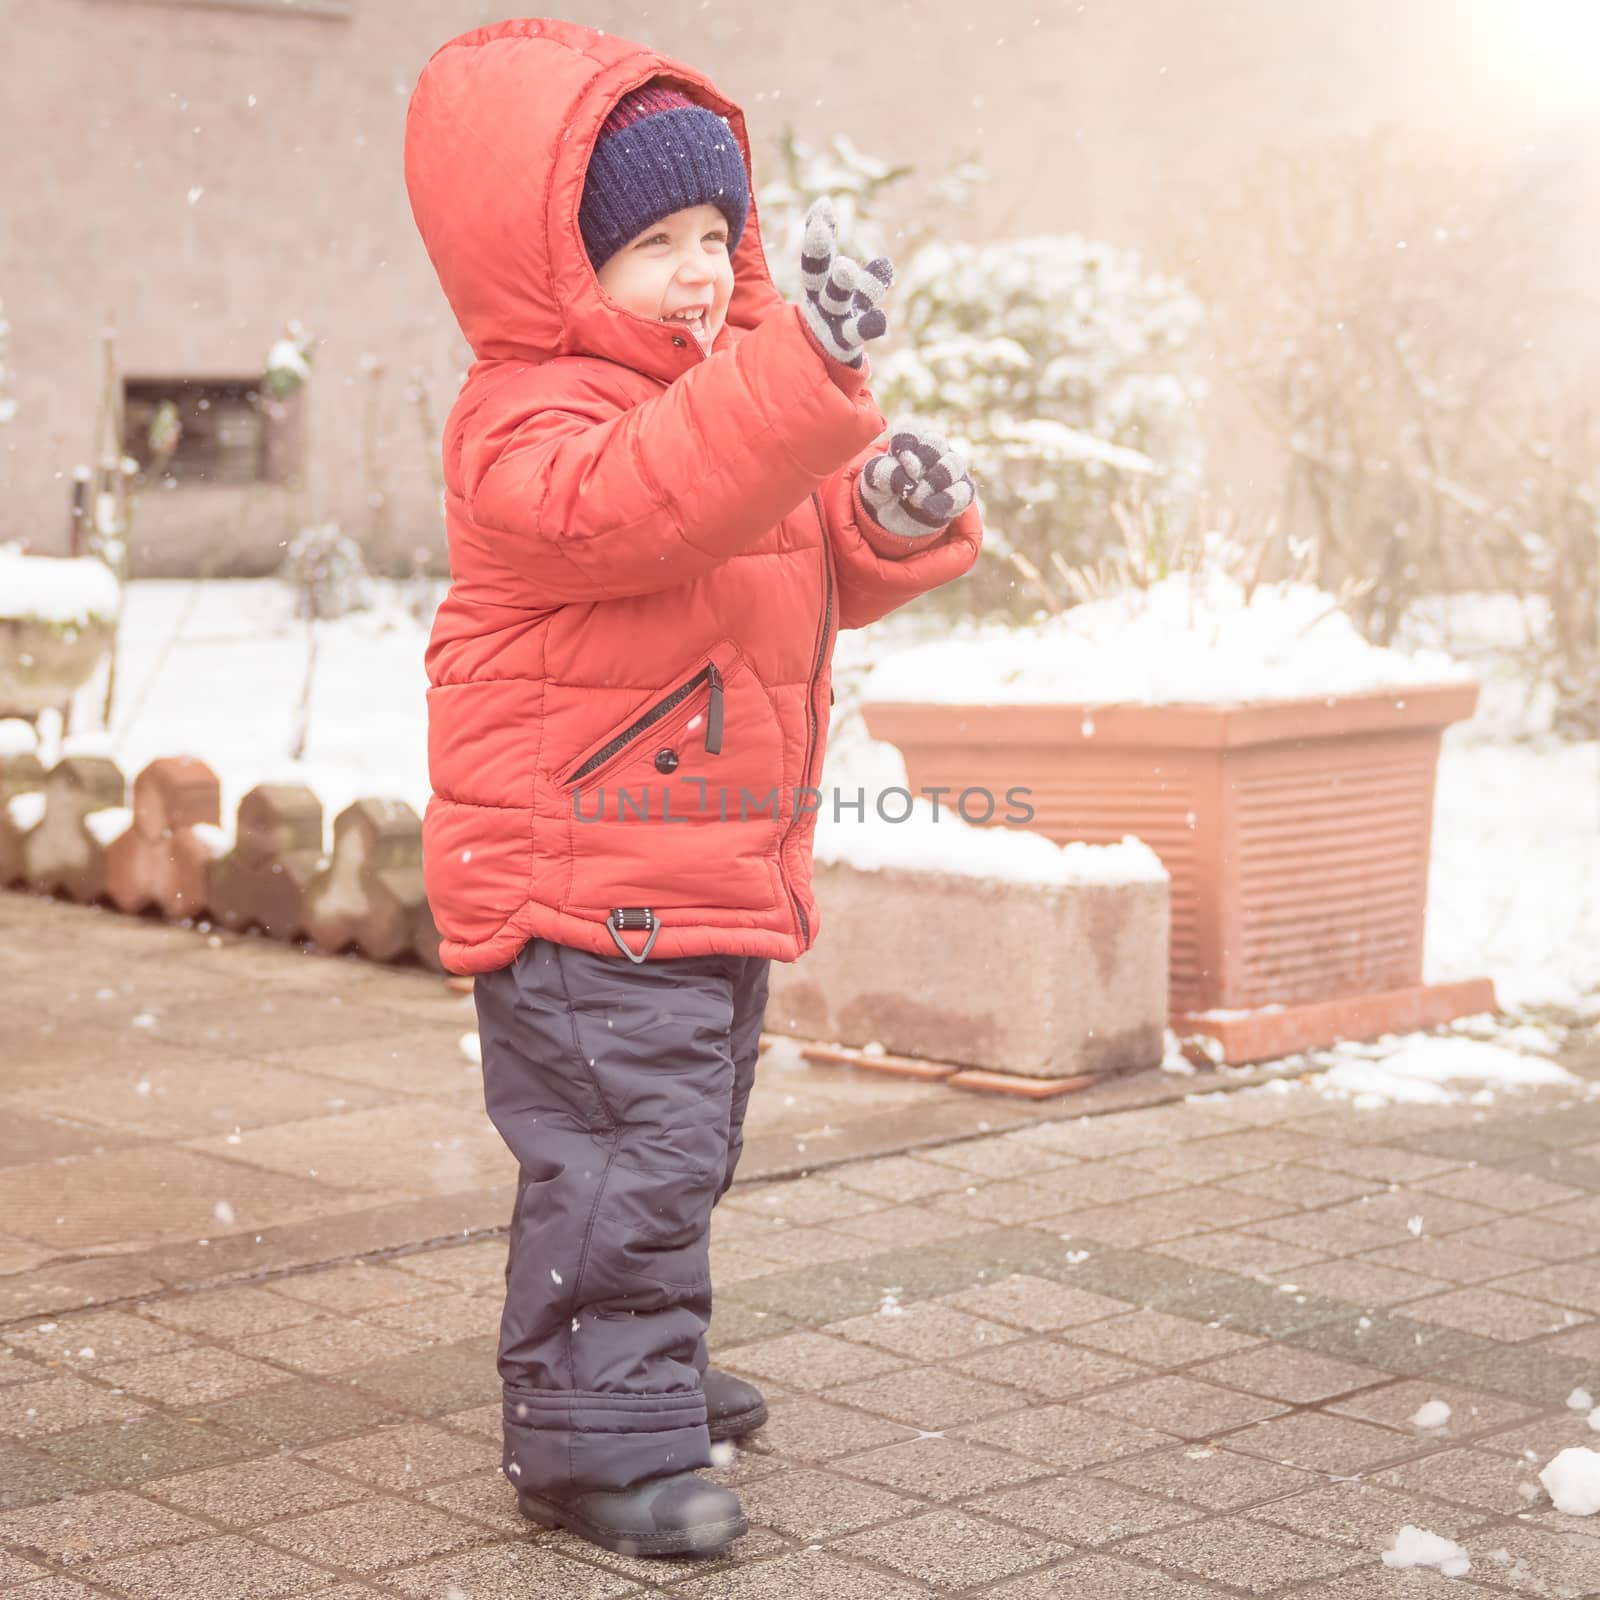 Infant boy smiles cheerfully while it's snowing,dressed in a red winter jacket and a woolen hat.